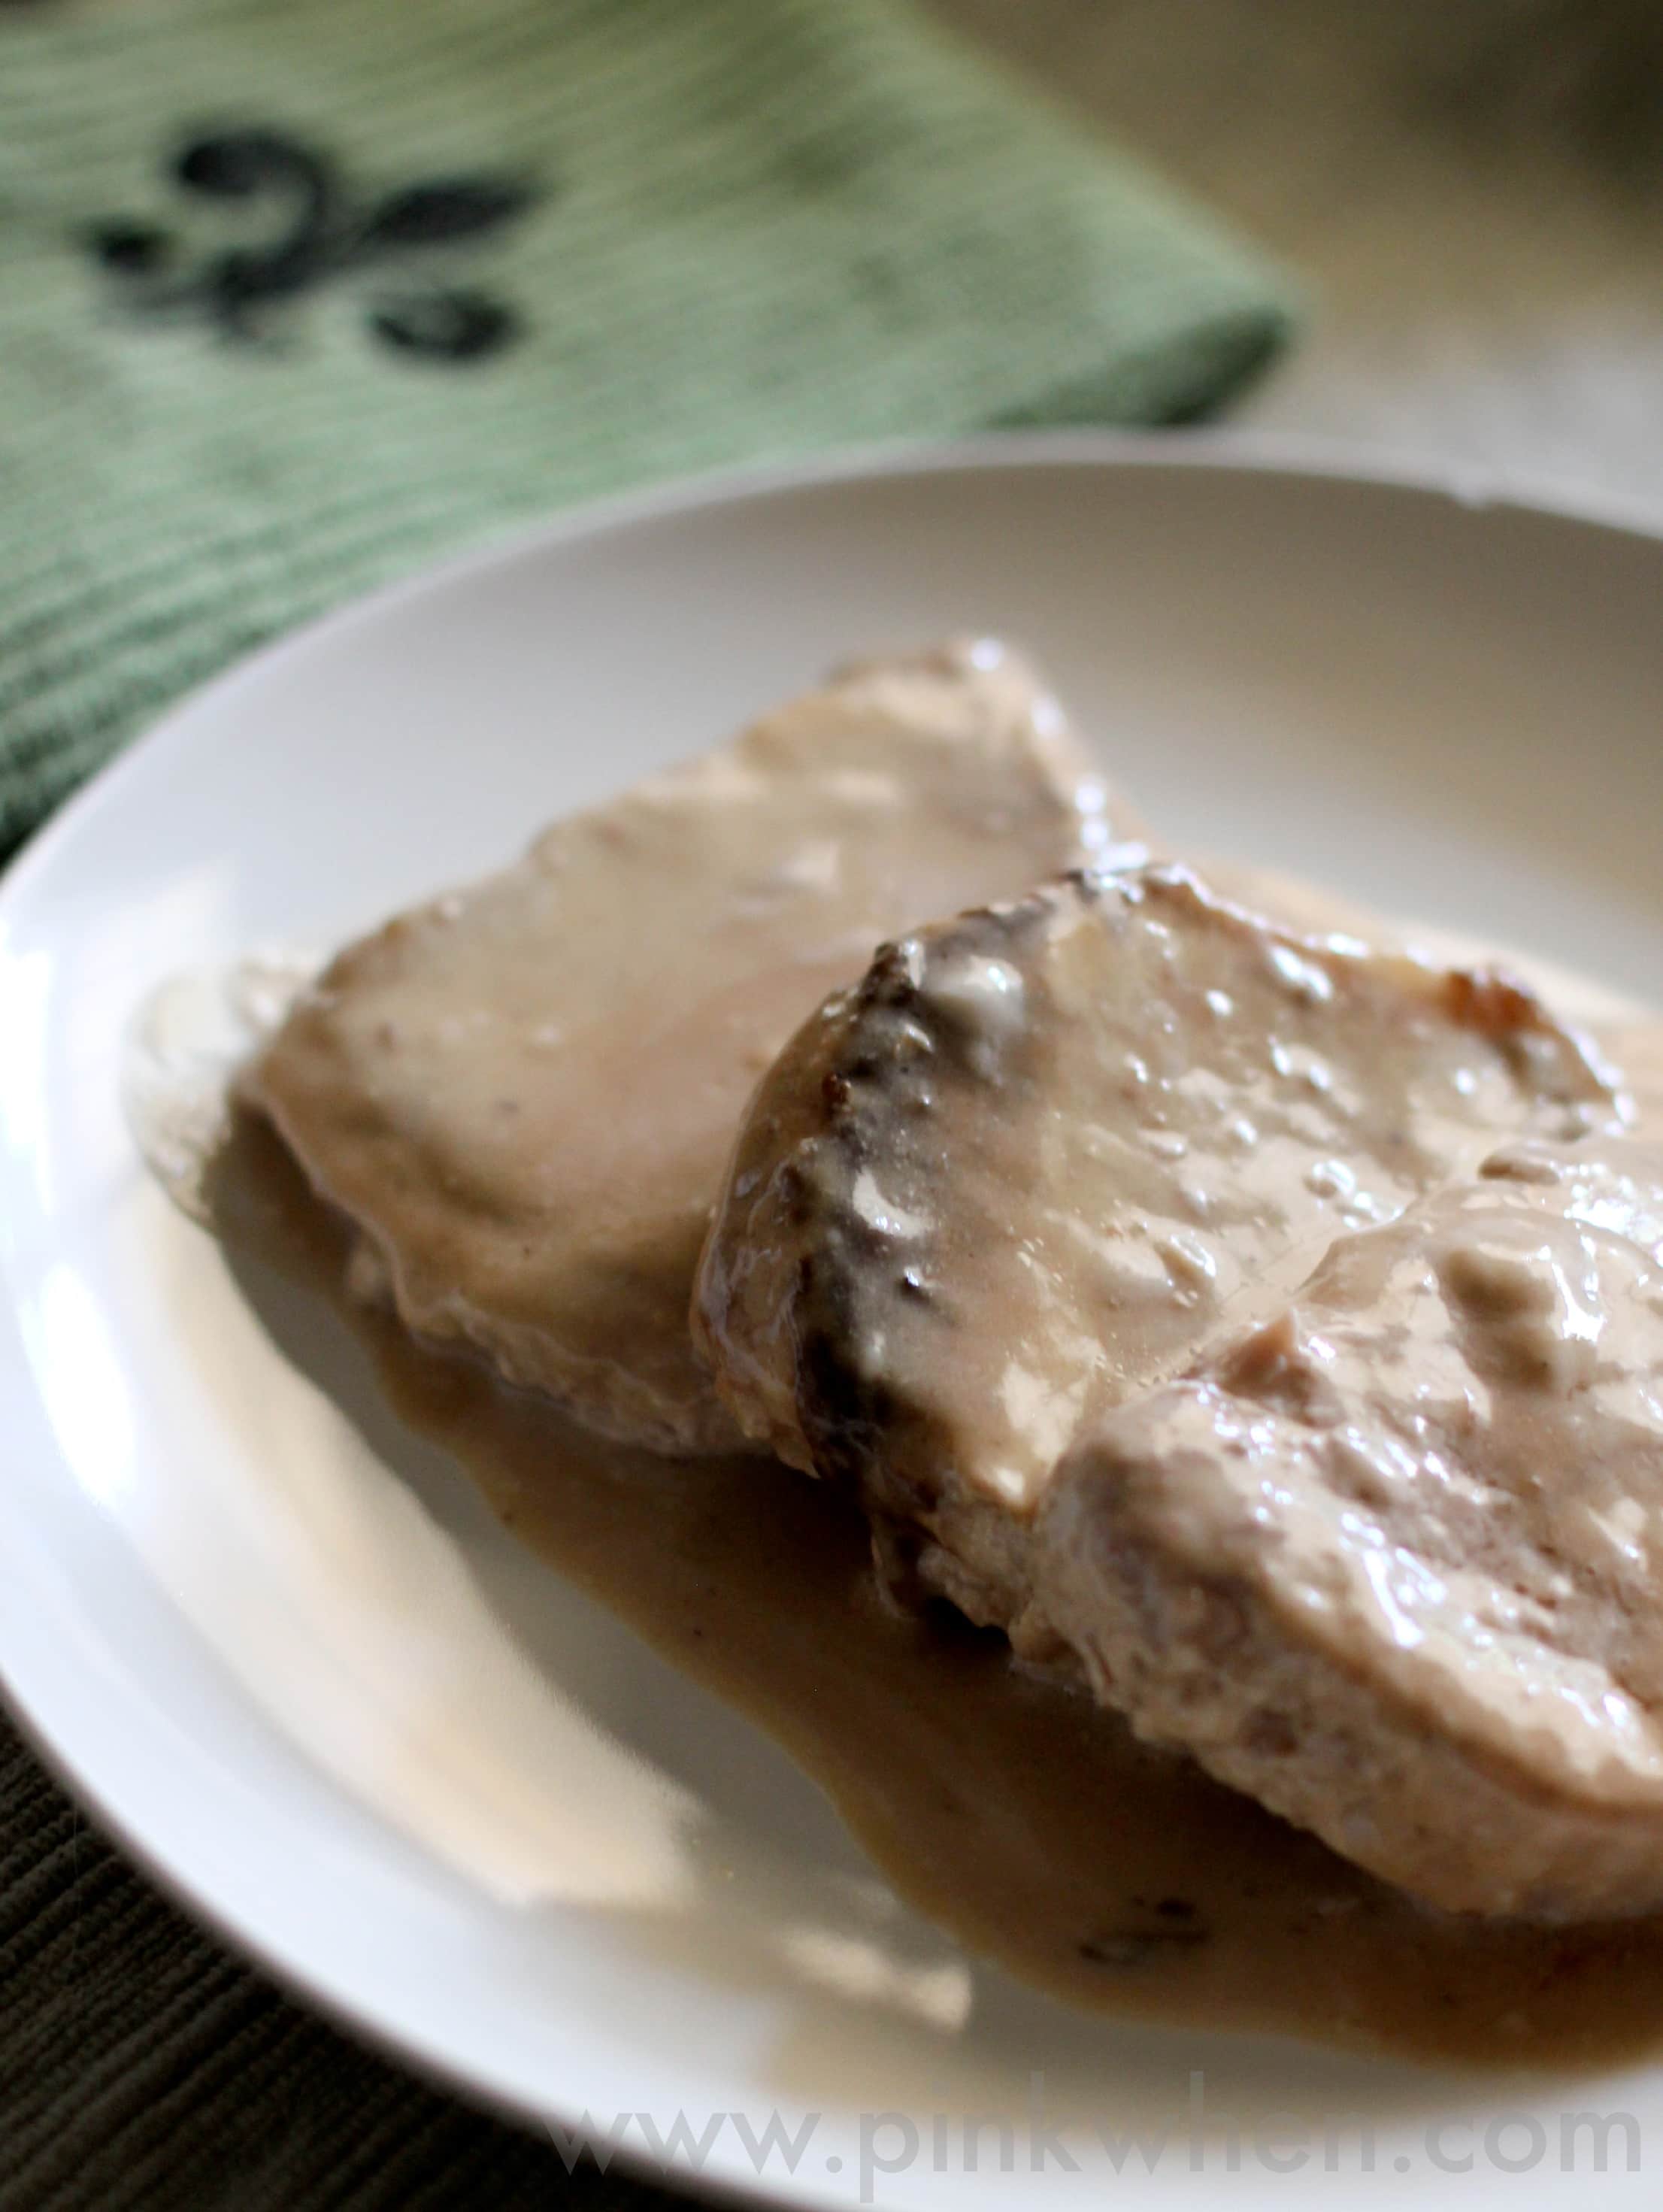 Slow Cooker Pork Chops and Gravy Recipe from PinkWhen